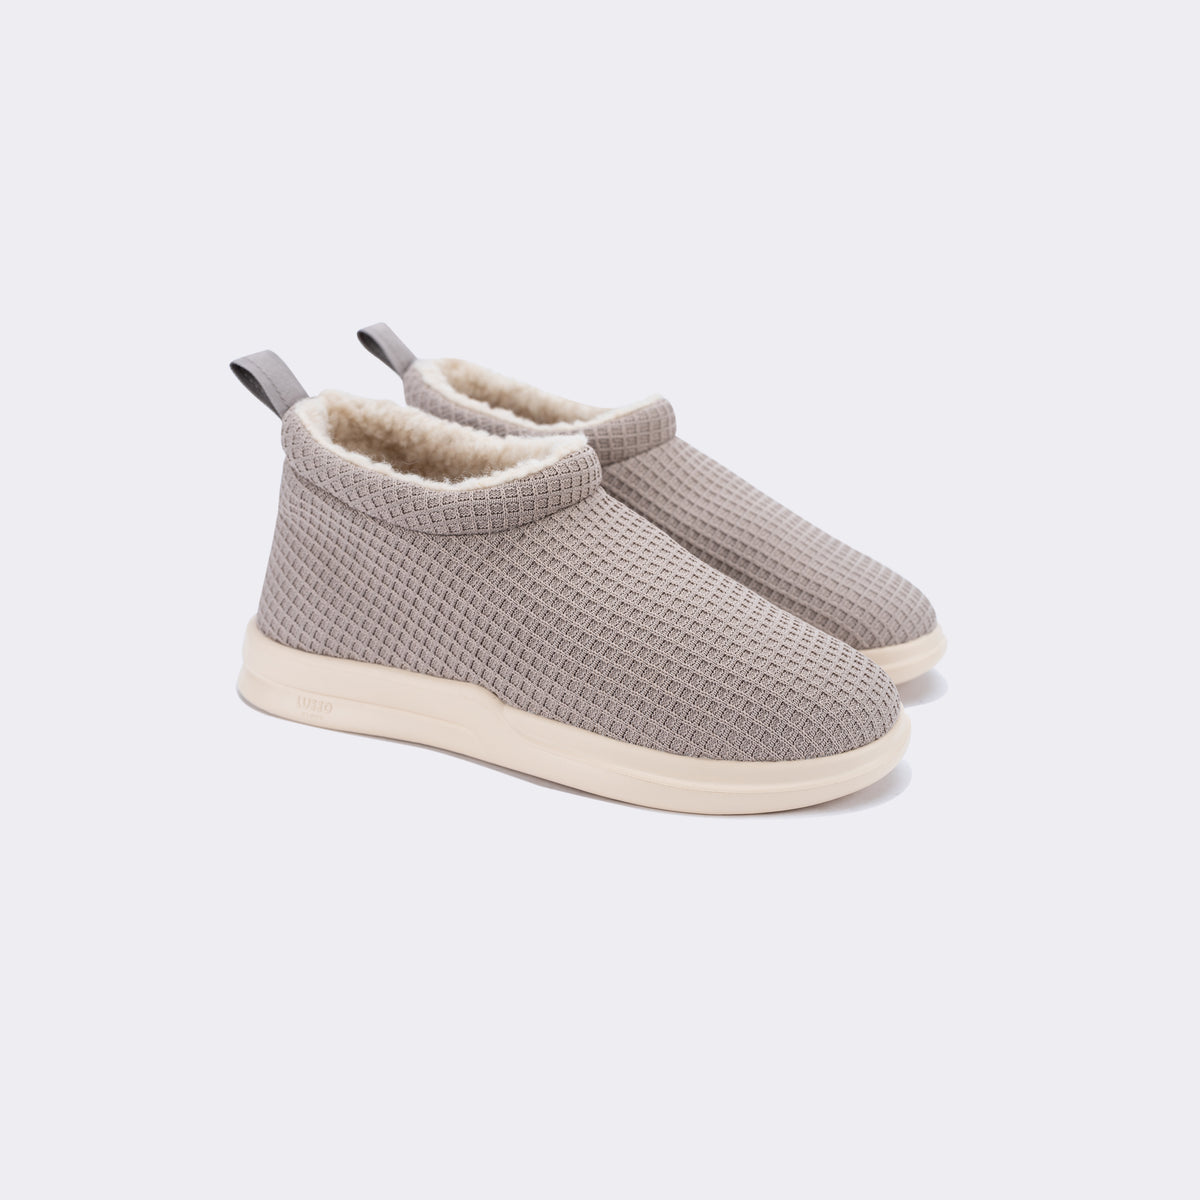 light grey shearling lined waffle knit slip on shoe with white sole 